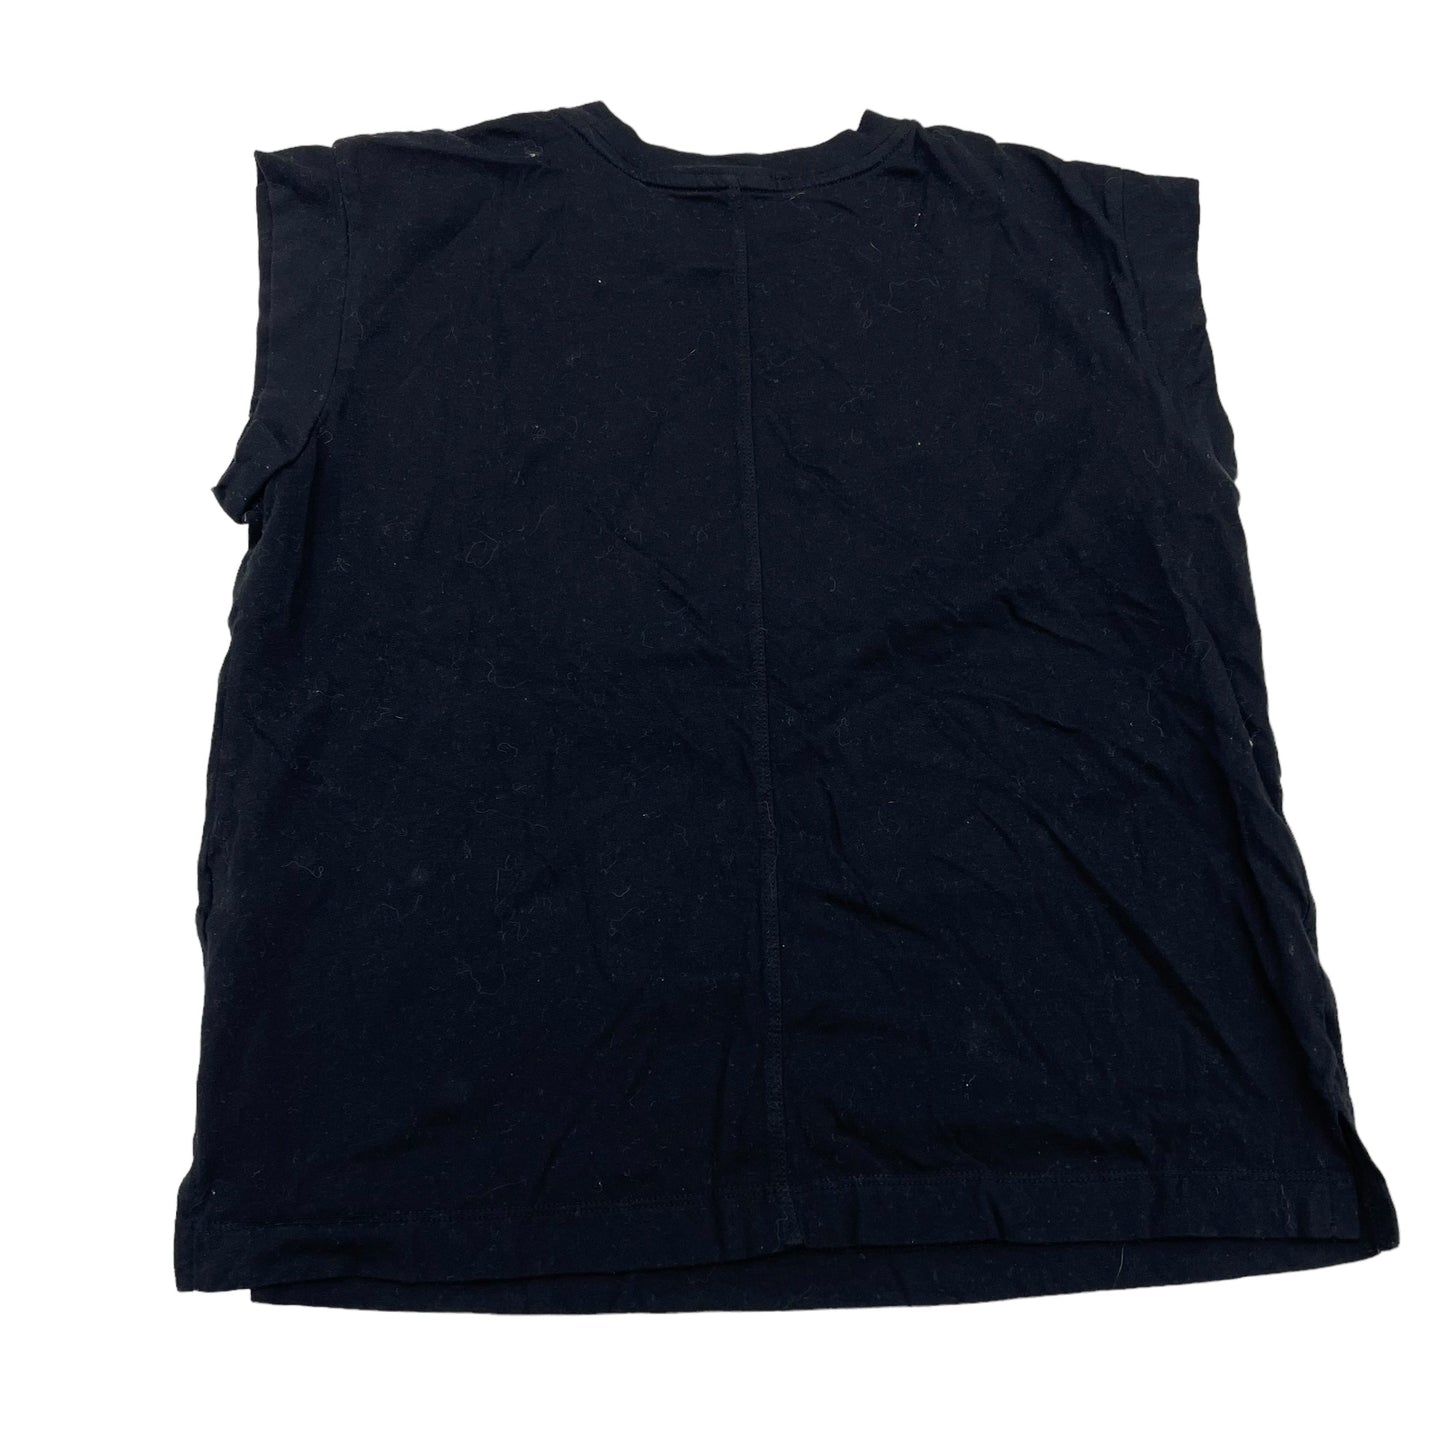 BLACK TOP SS BASIC by A NEW DAY Size:XS